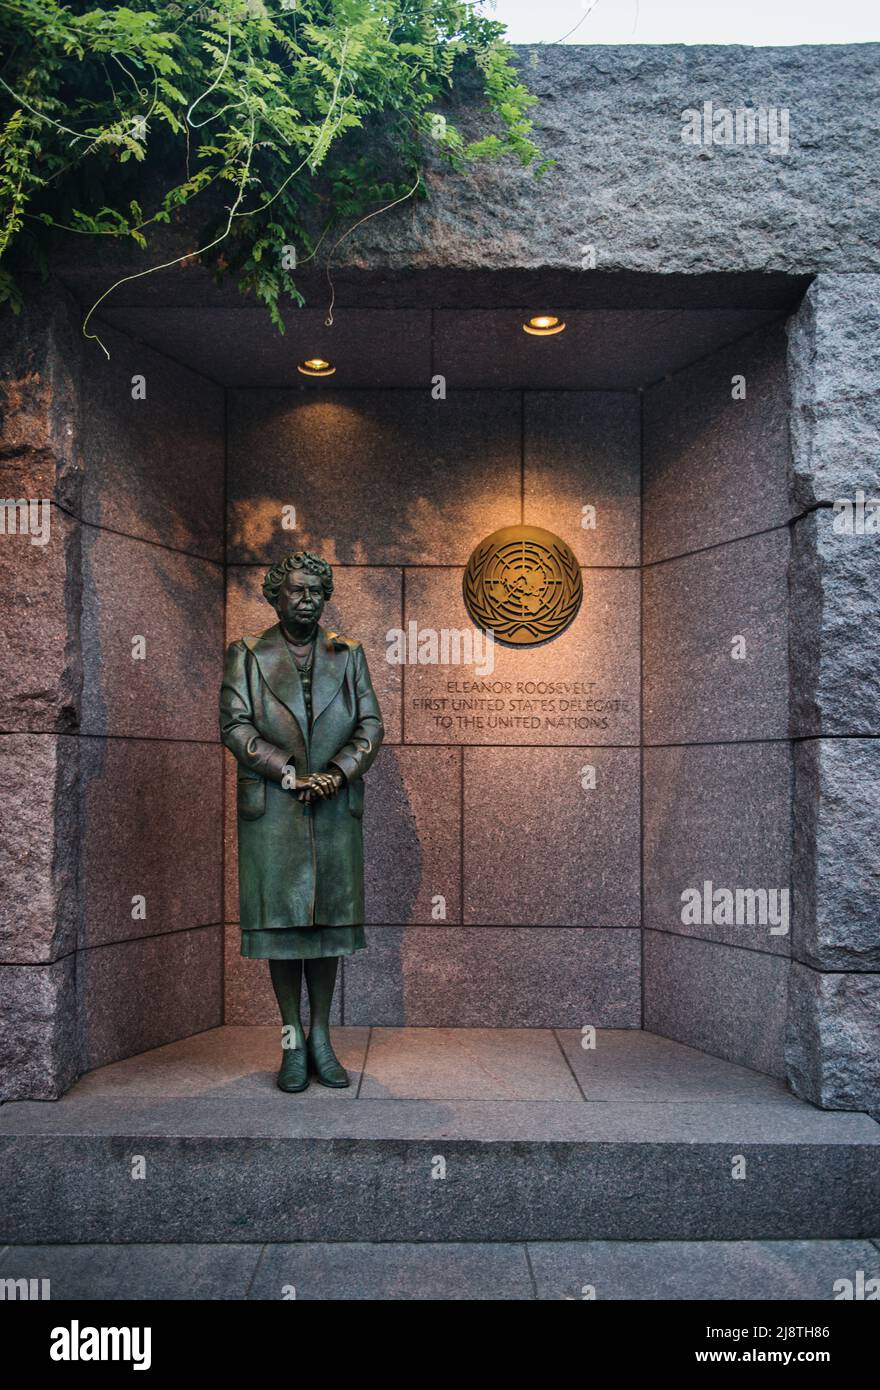 Eleanor Roosevelt statue within the Franklin Delano Roosevelt Memorial site, Washington, D.C., United States Stock Photo